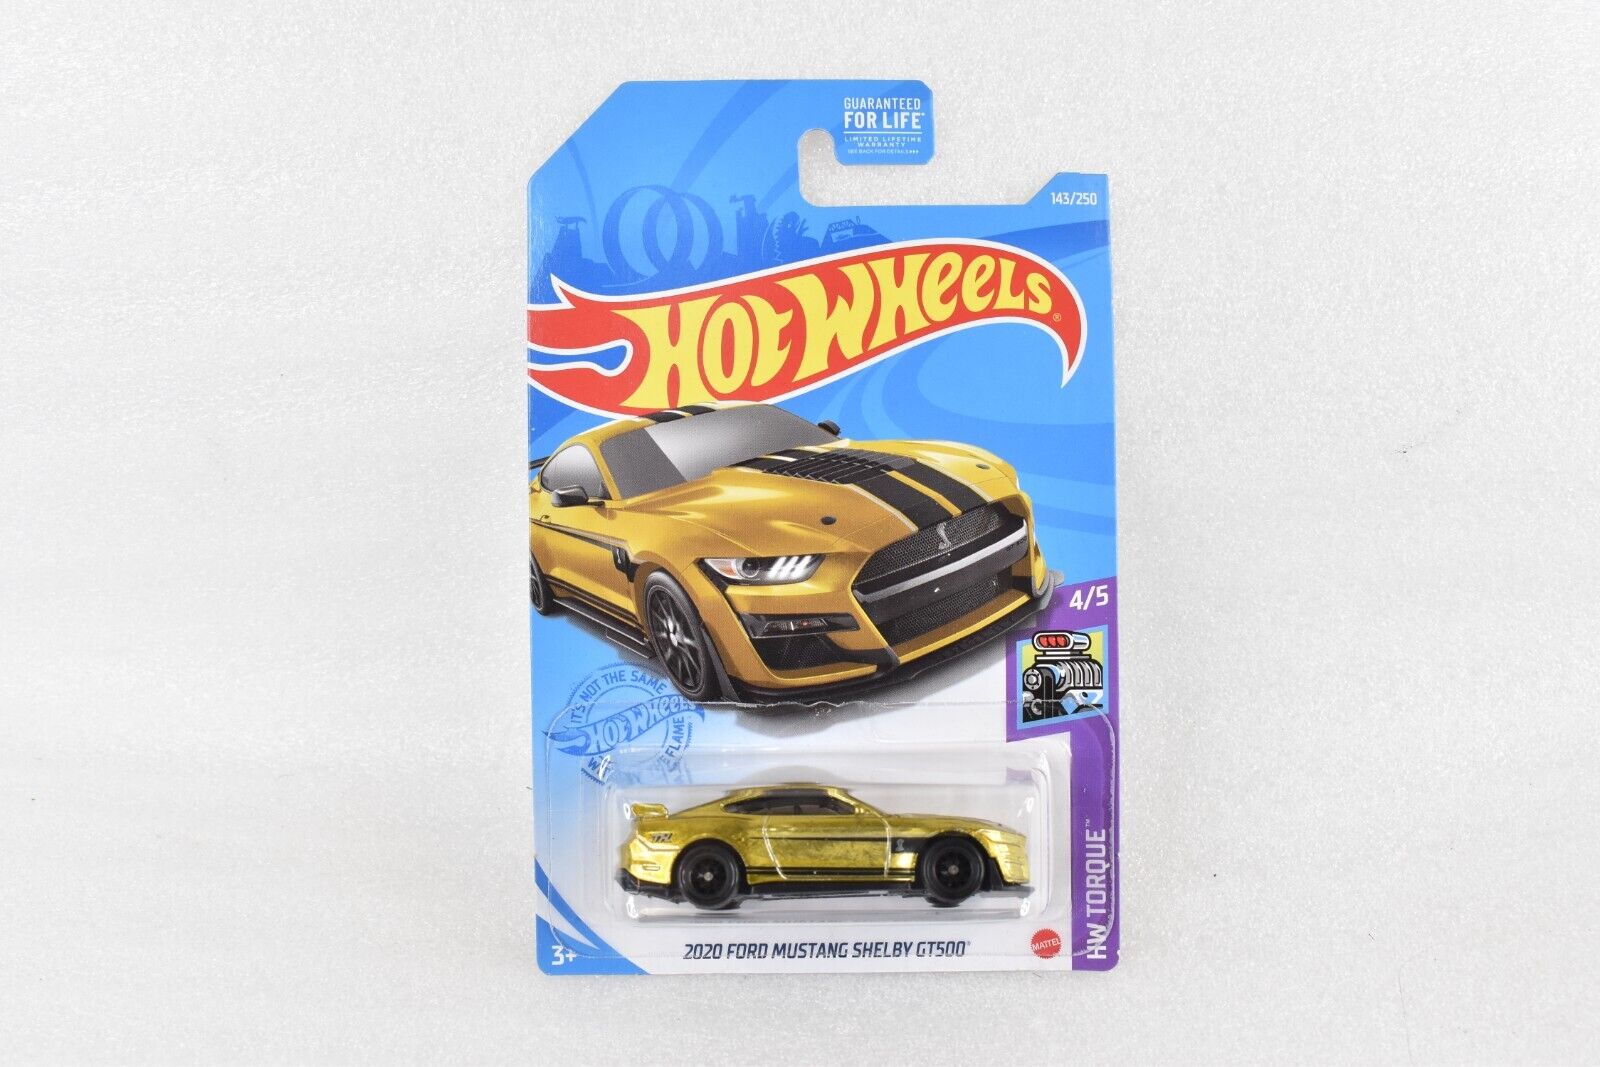 ❤️ Hot Wheels 2020 Ford Shelby Mustang GT500 Super Treasure Hunt, 2021 G Case